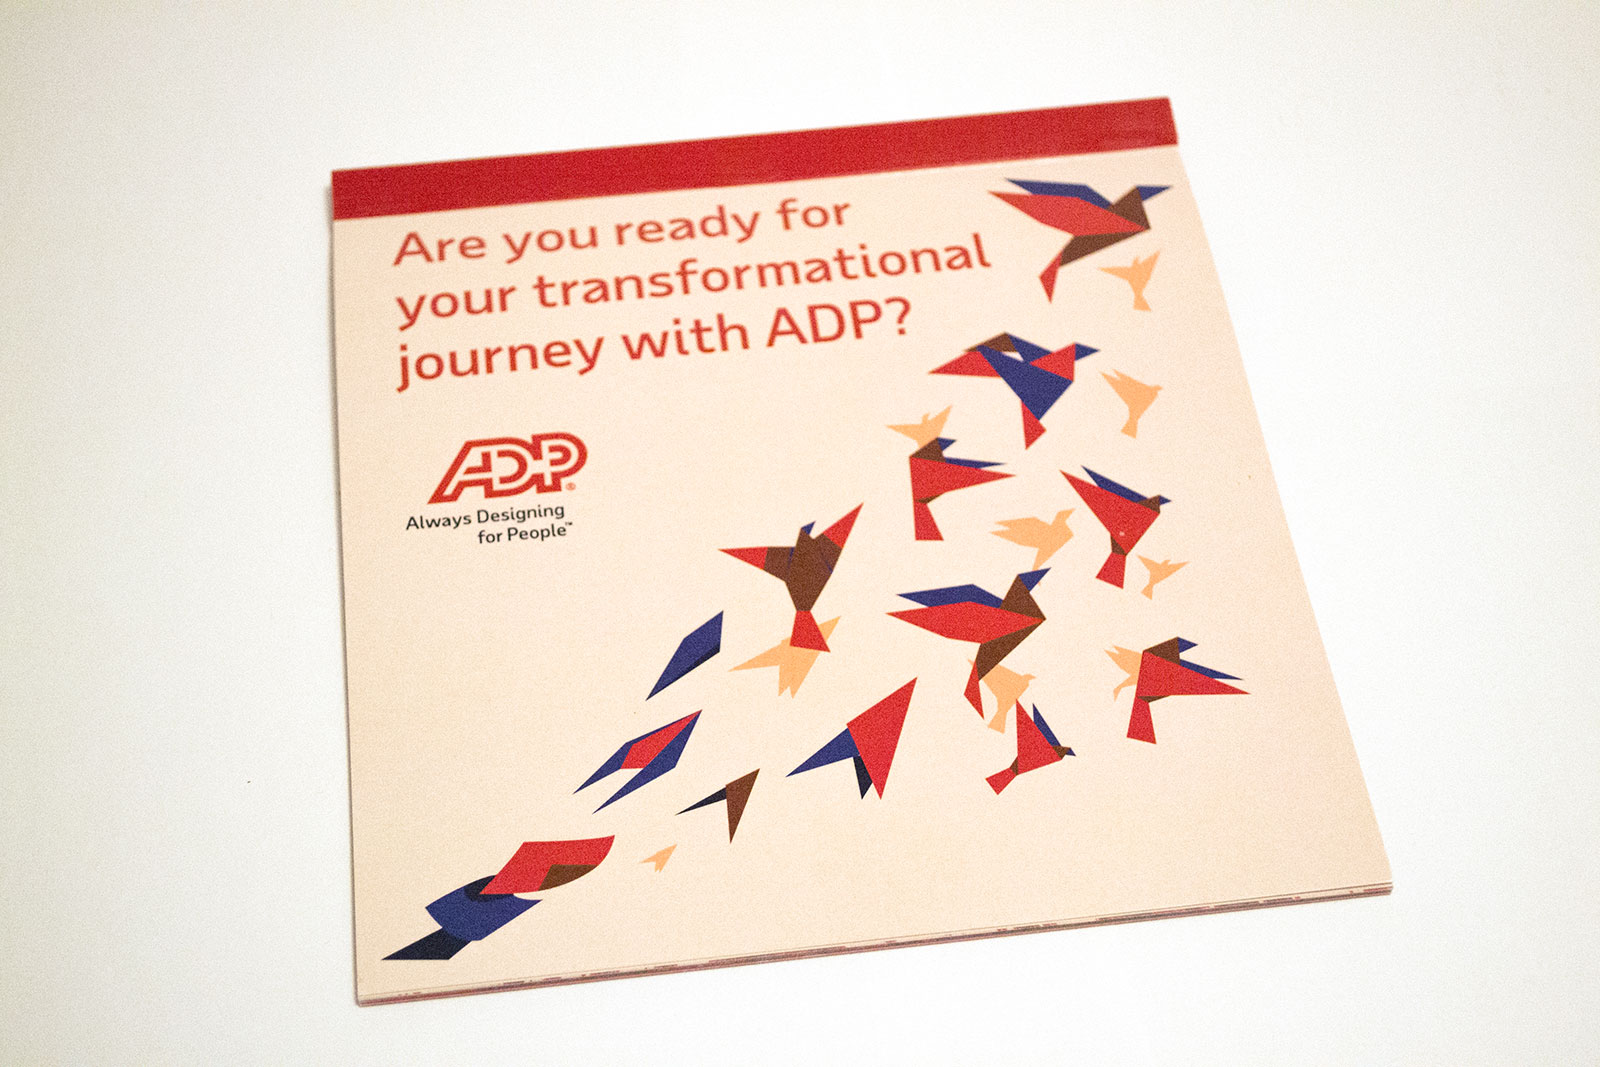 Origami book reads Are you ready for your transformational journey with ADP? with the ADP Always designing for people logo underneath